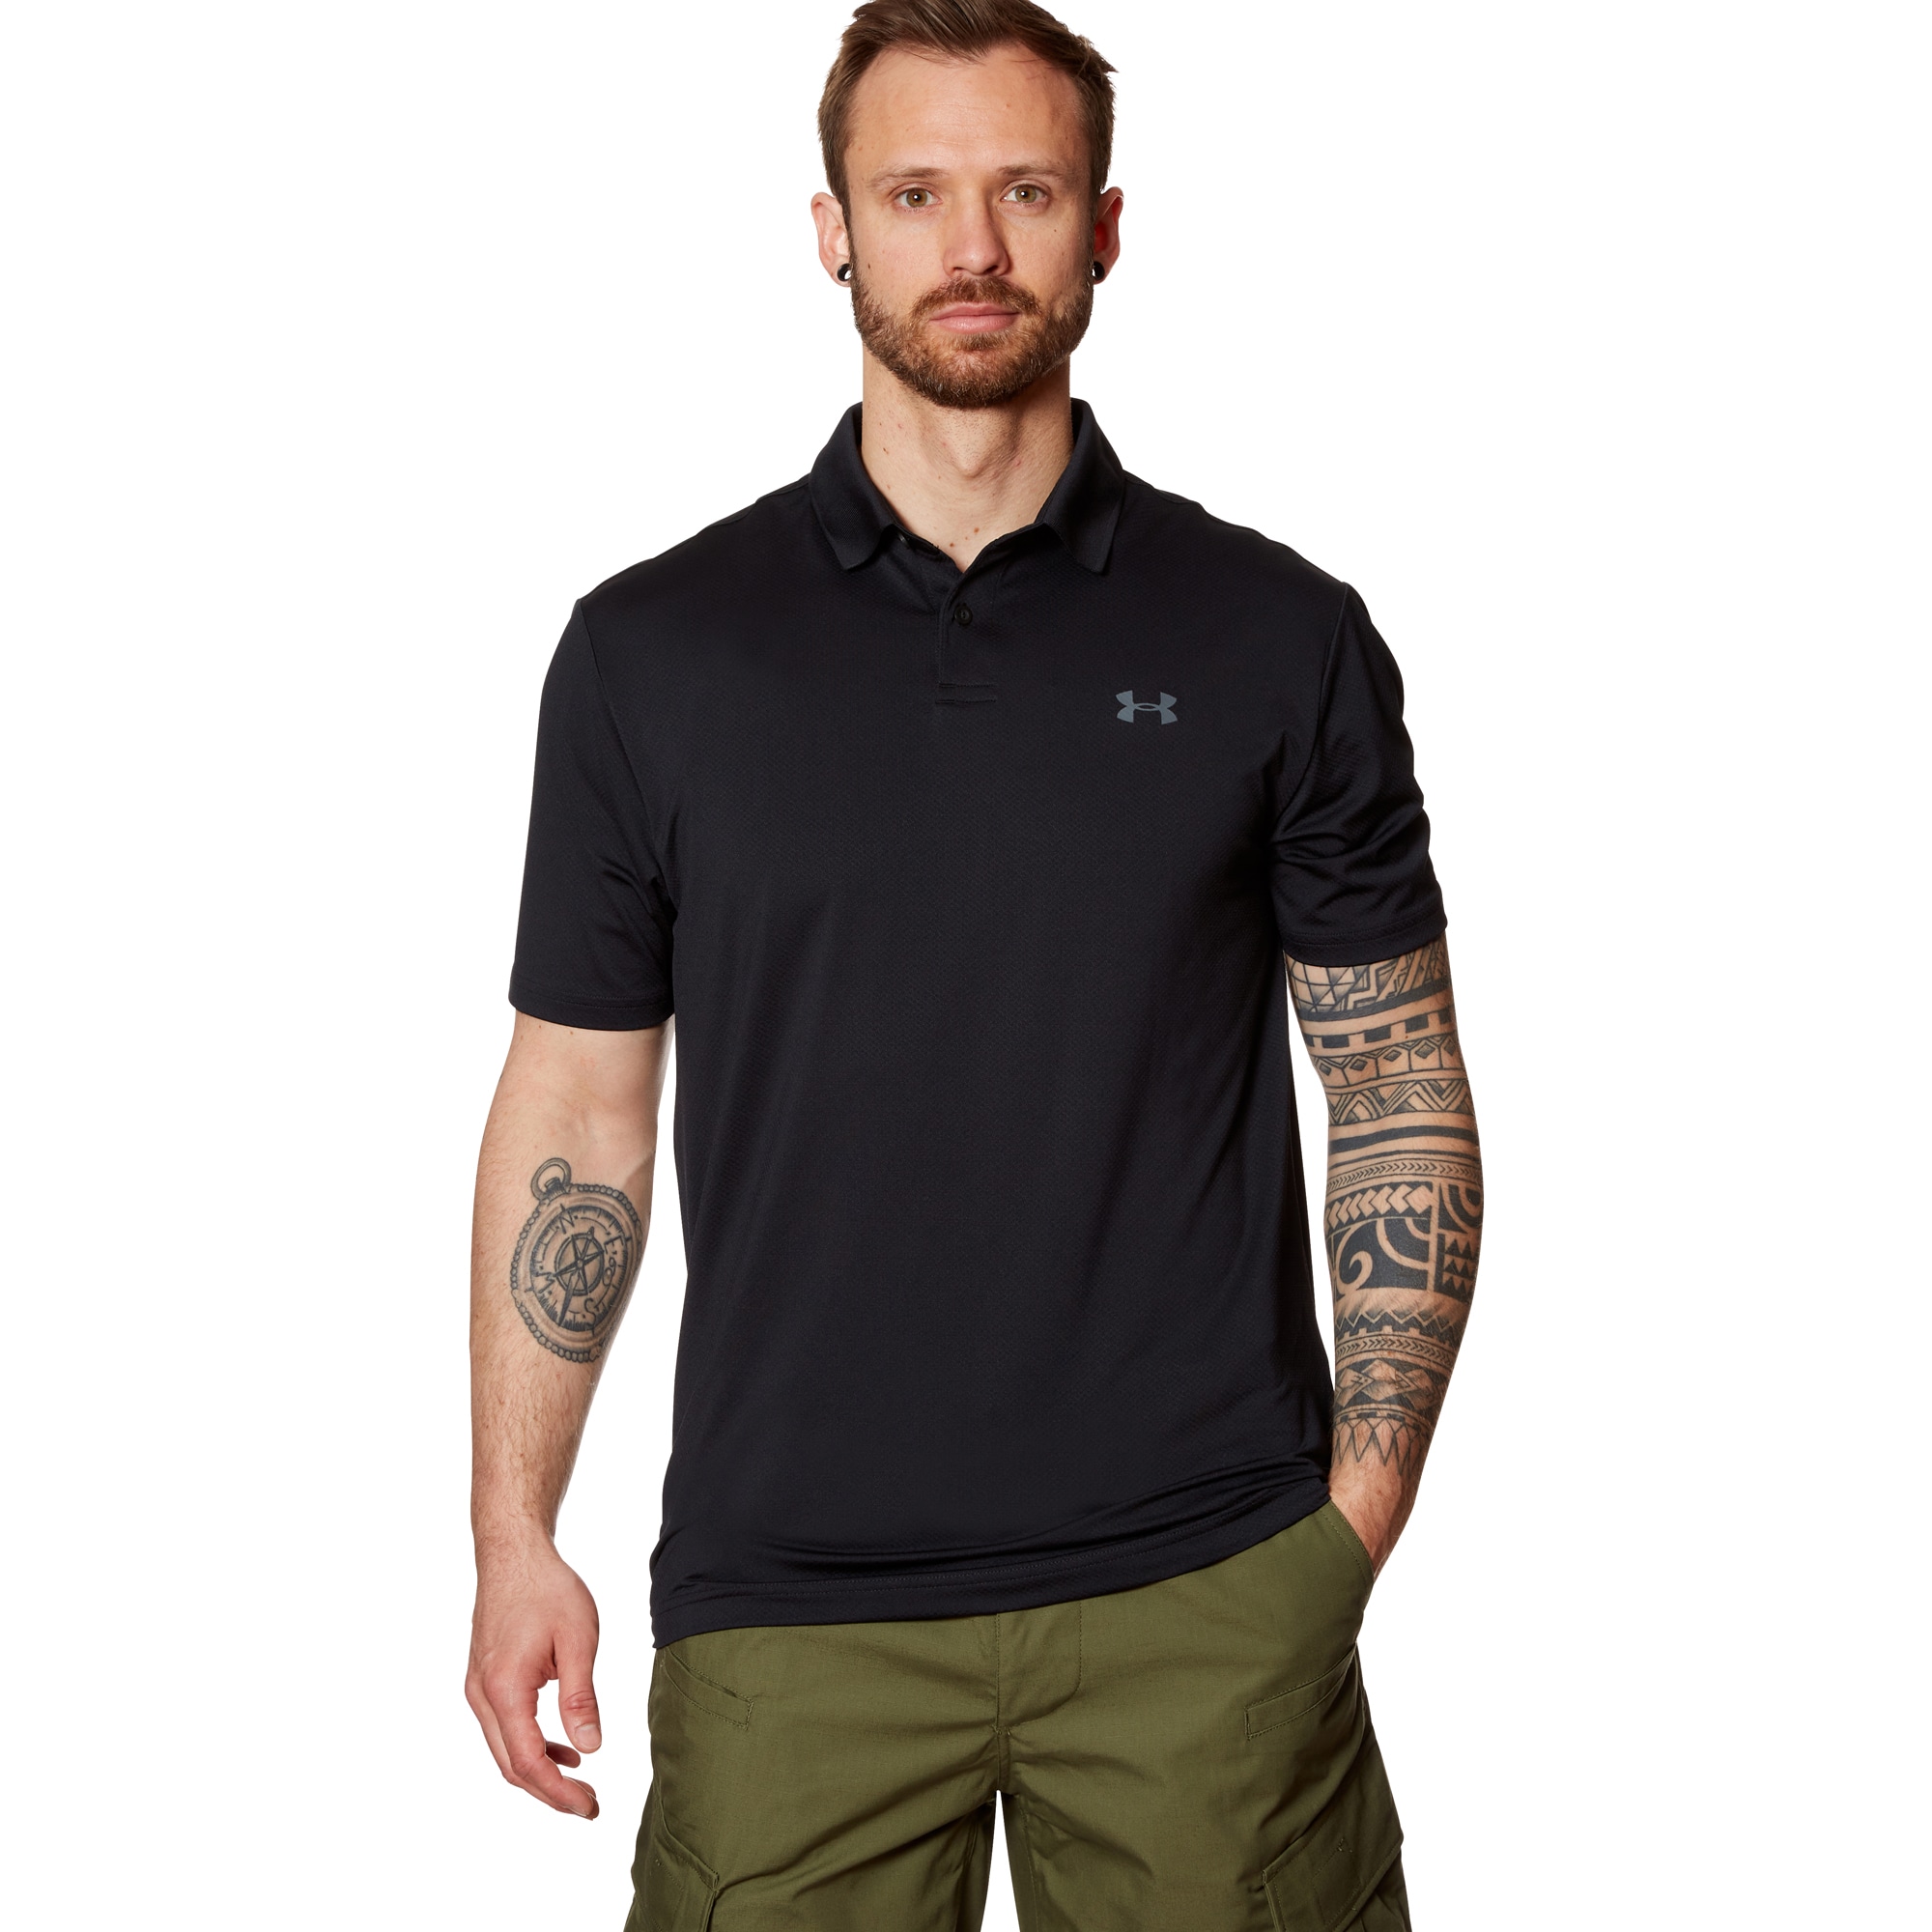 Purchase the Under Armour Polo Shirt 